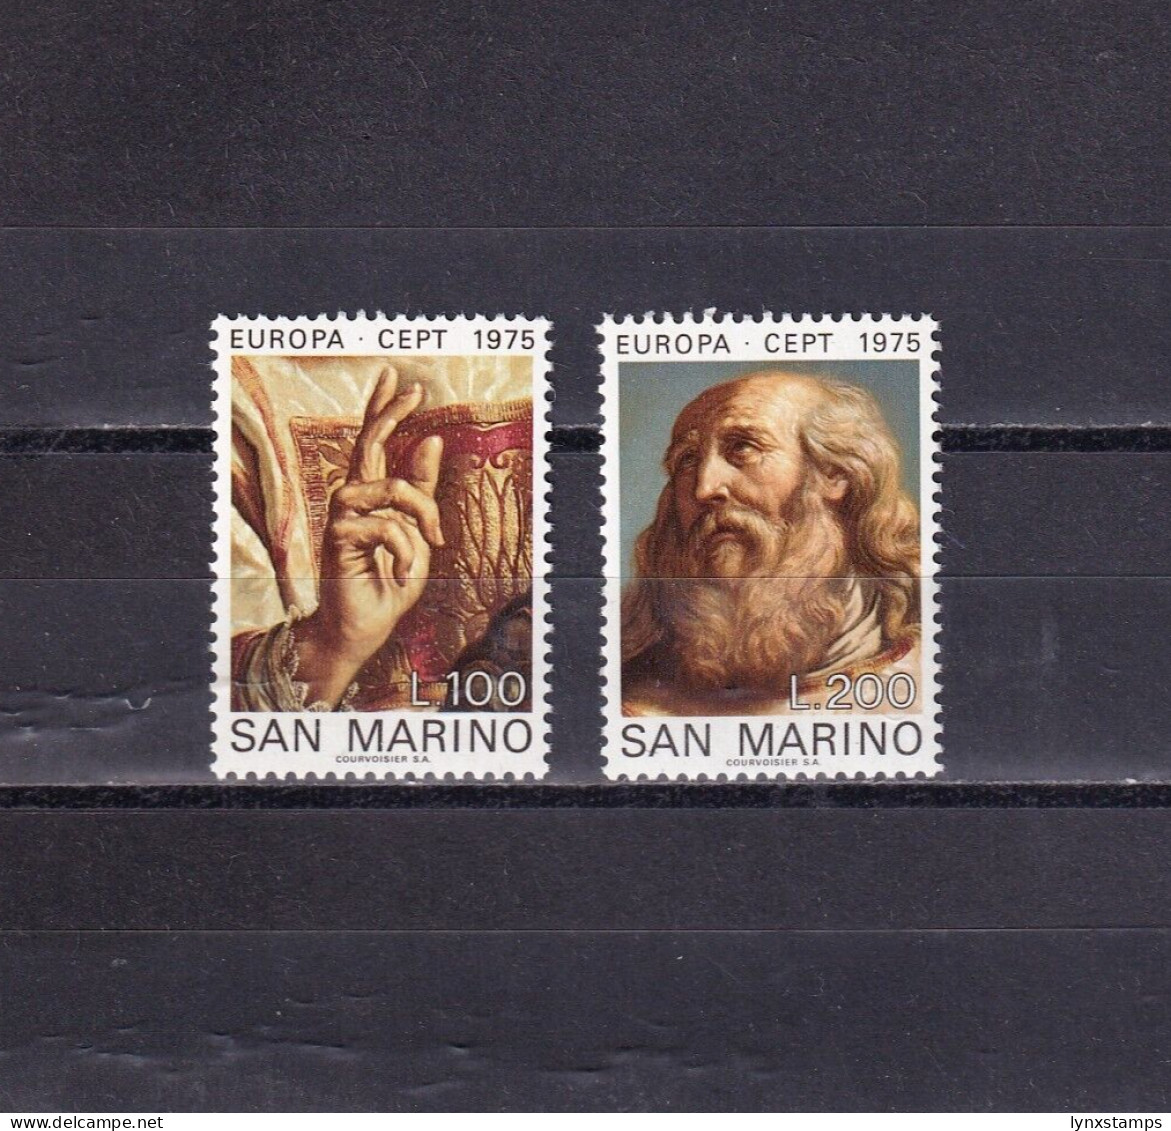 SA04 San Marino 1975 EUROPA Stamps - Paintings Mints Stamps - Neufs